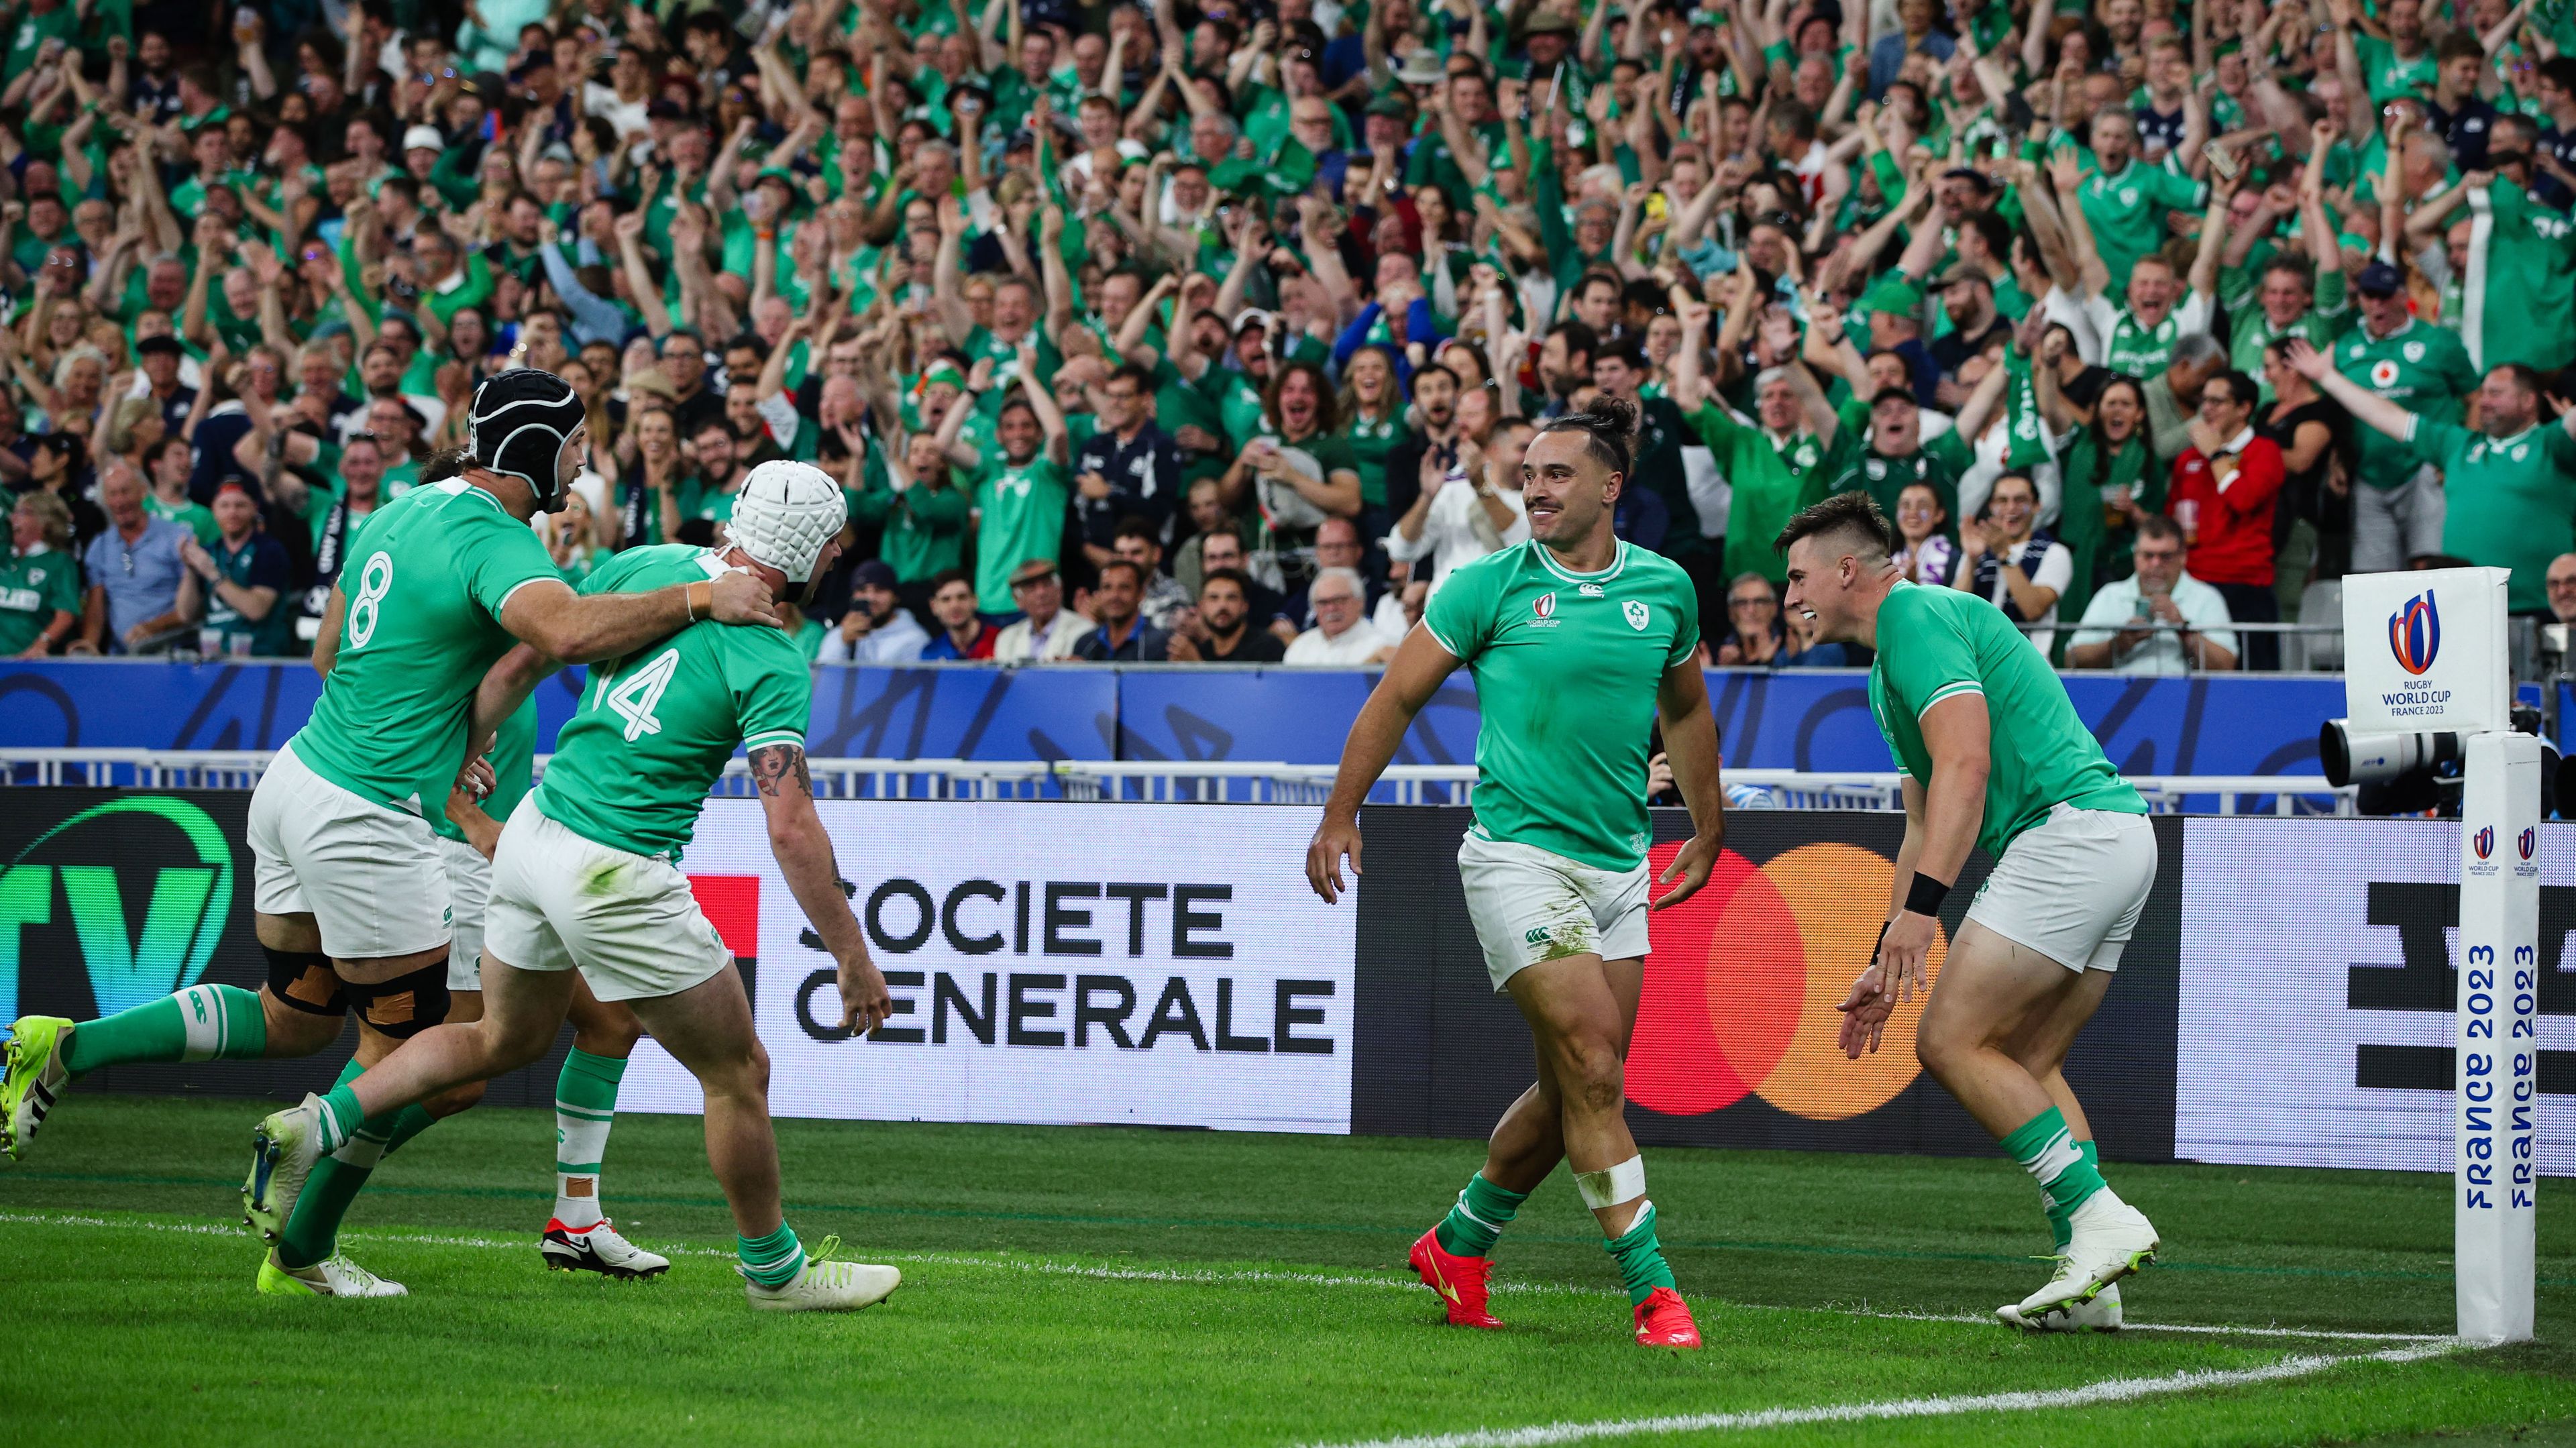 PARIS, FRANCE - OCTOBER 7:  James Lowe of Ireland celebrates scoring his sides first try with team mates during the Rugby World Cup France 2023 match between Ireland and Scotland at Stade de France on October 7, 2023 in Paris, France. (Photo by Craig Mercer/MB Media/Getty Images)